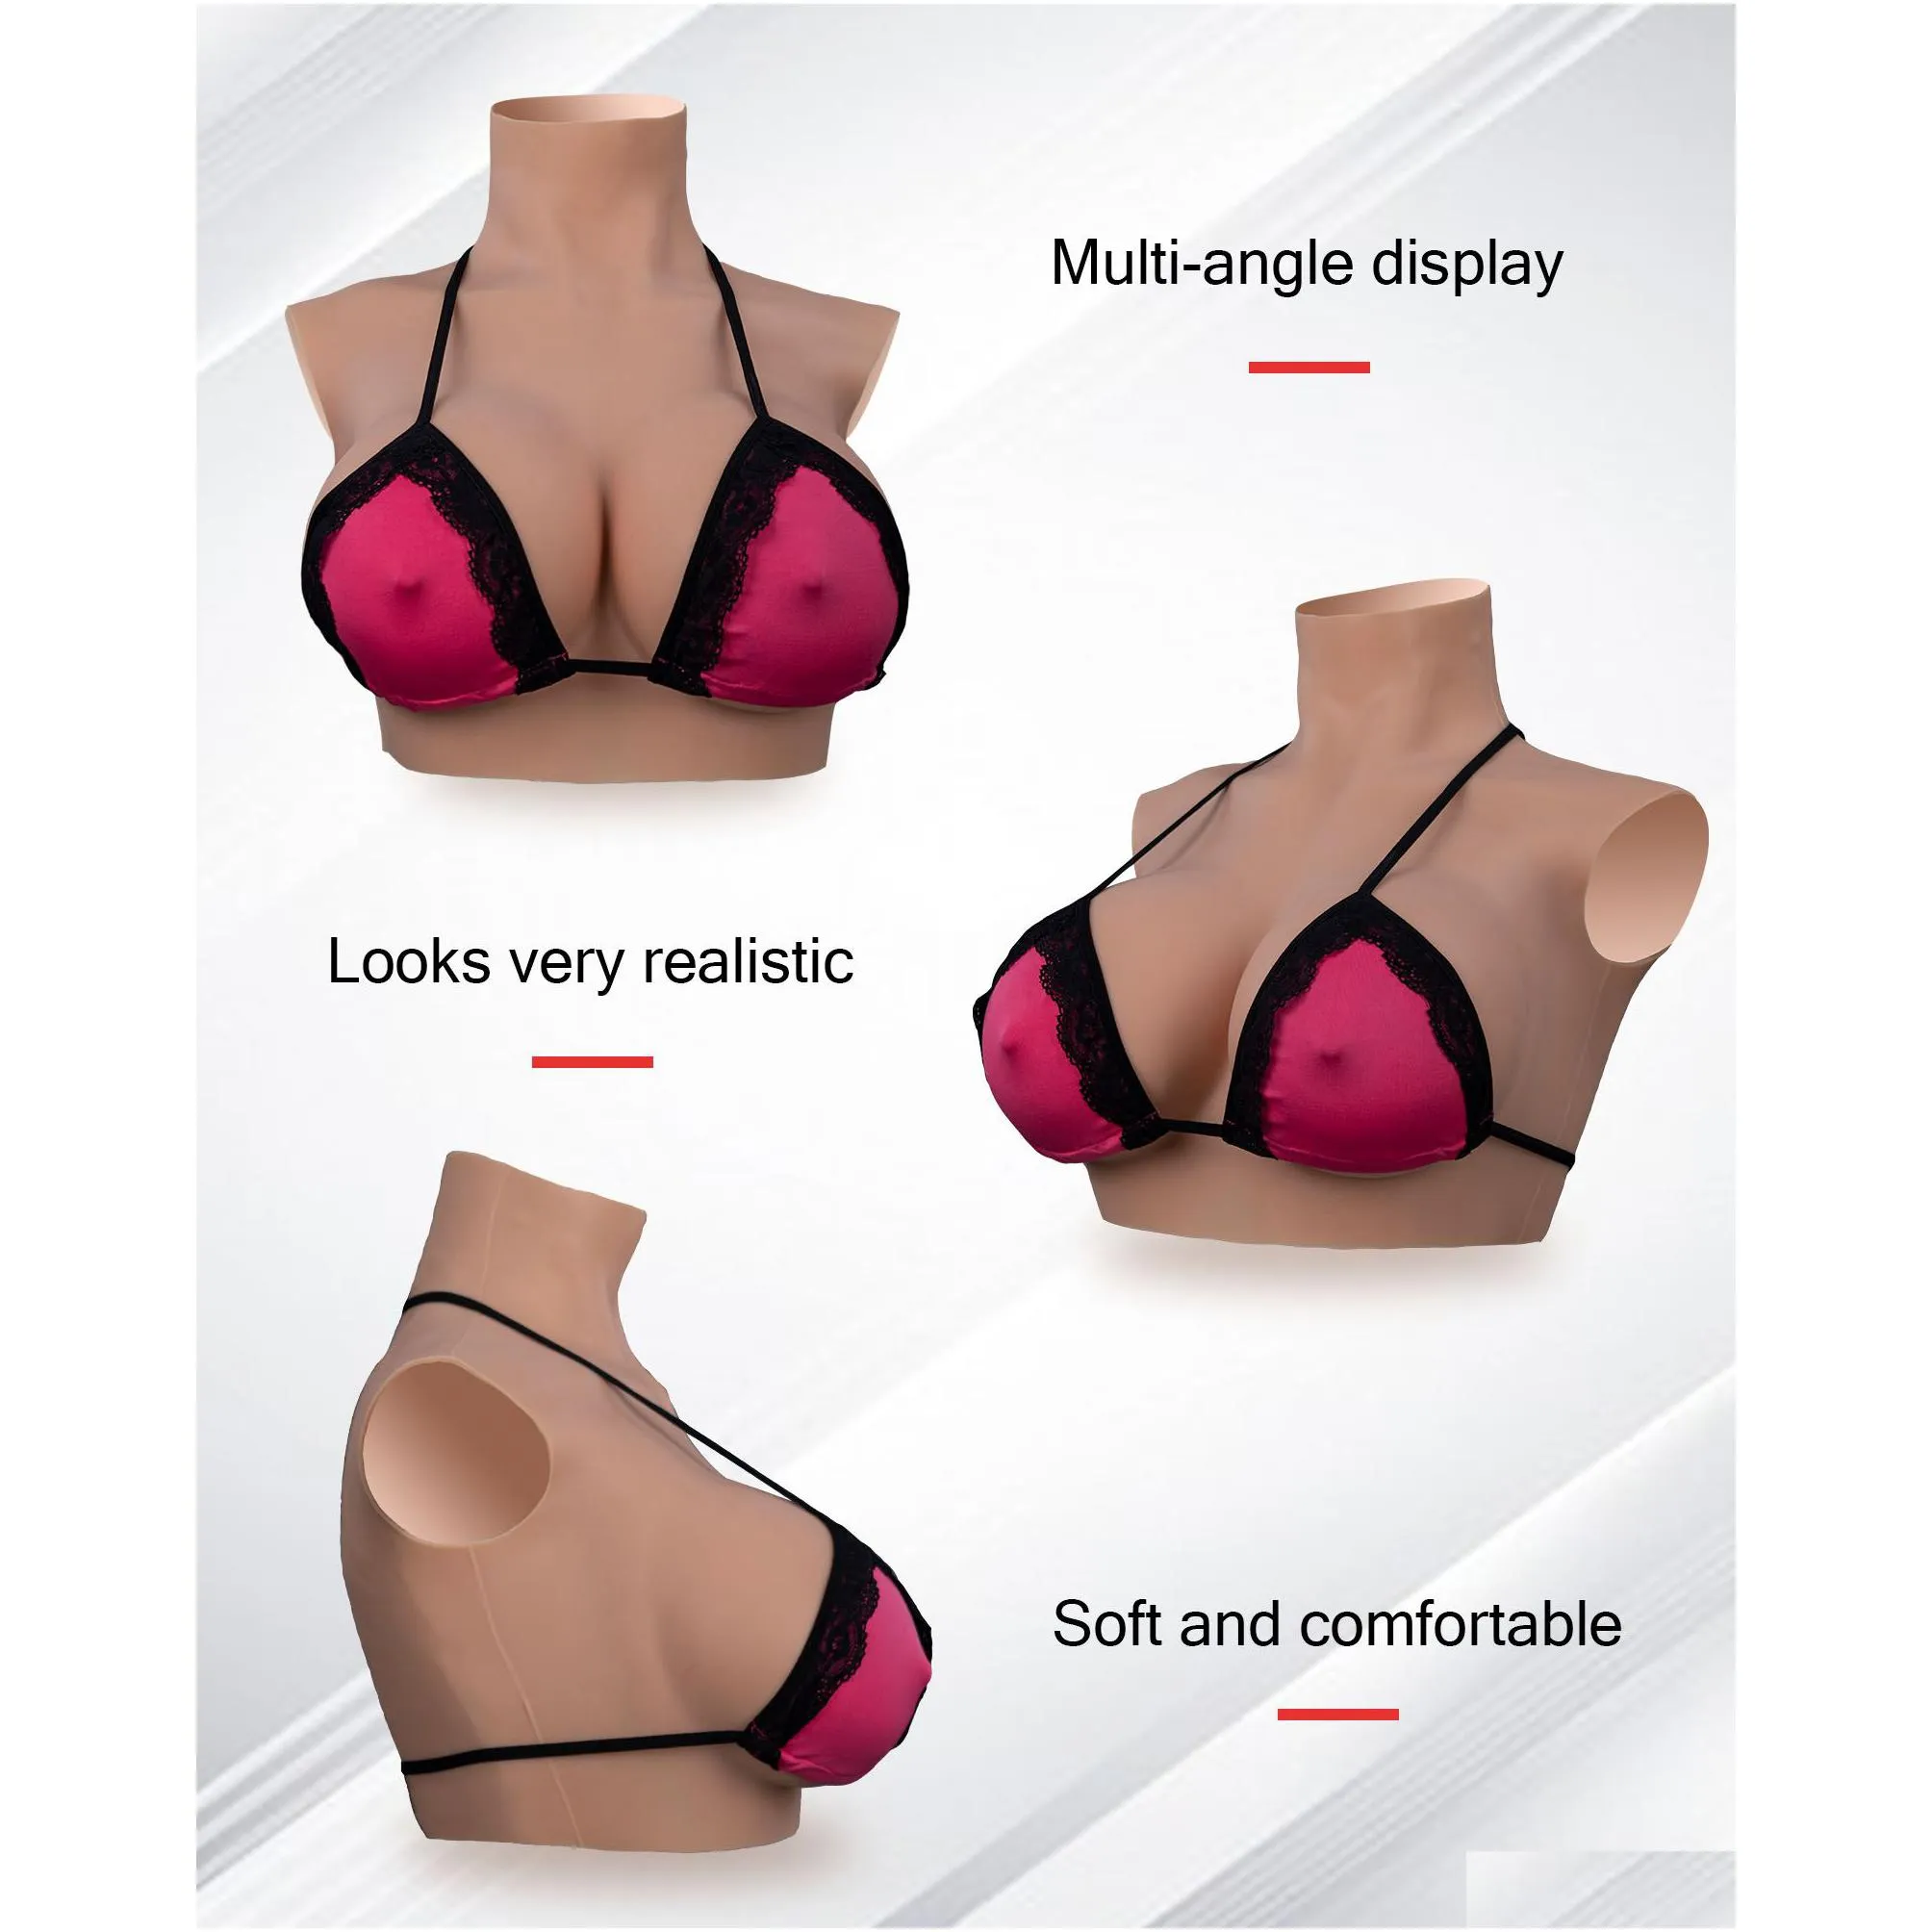 silicone breast plate fake breast fake boob b-g cup breastplates for transgender cosplay drag queen